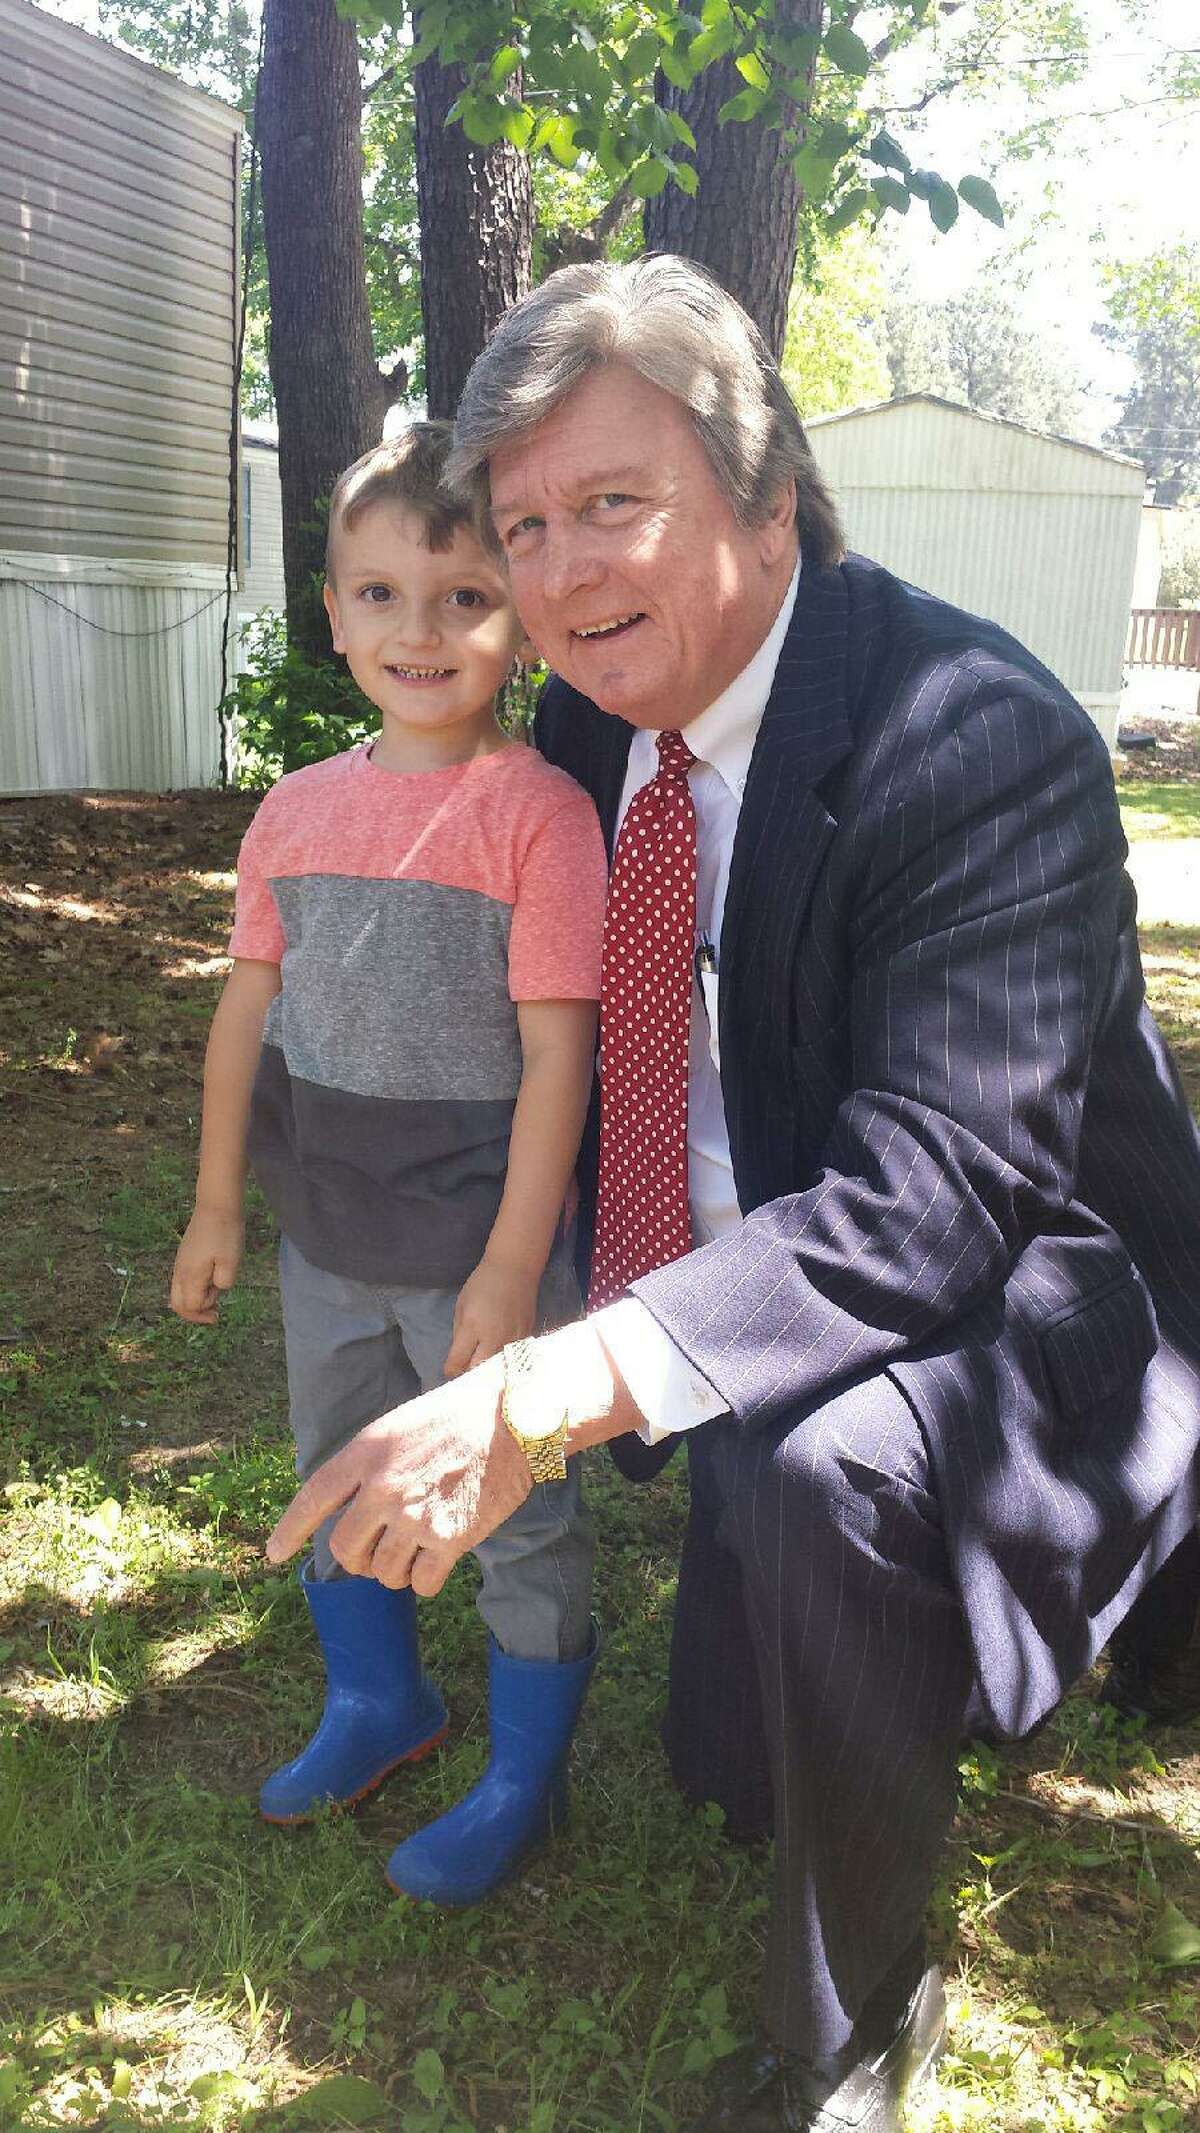 Baytown attorney Craig Muessig is pleased a Jefferson County jury decided in favor of his client, 4-year-old Rayden Meadows. The child's father was killed while changing a flat tire on I-10 in Beaumont in January 2016 by an alleged drunk driver.